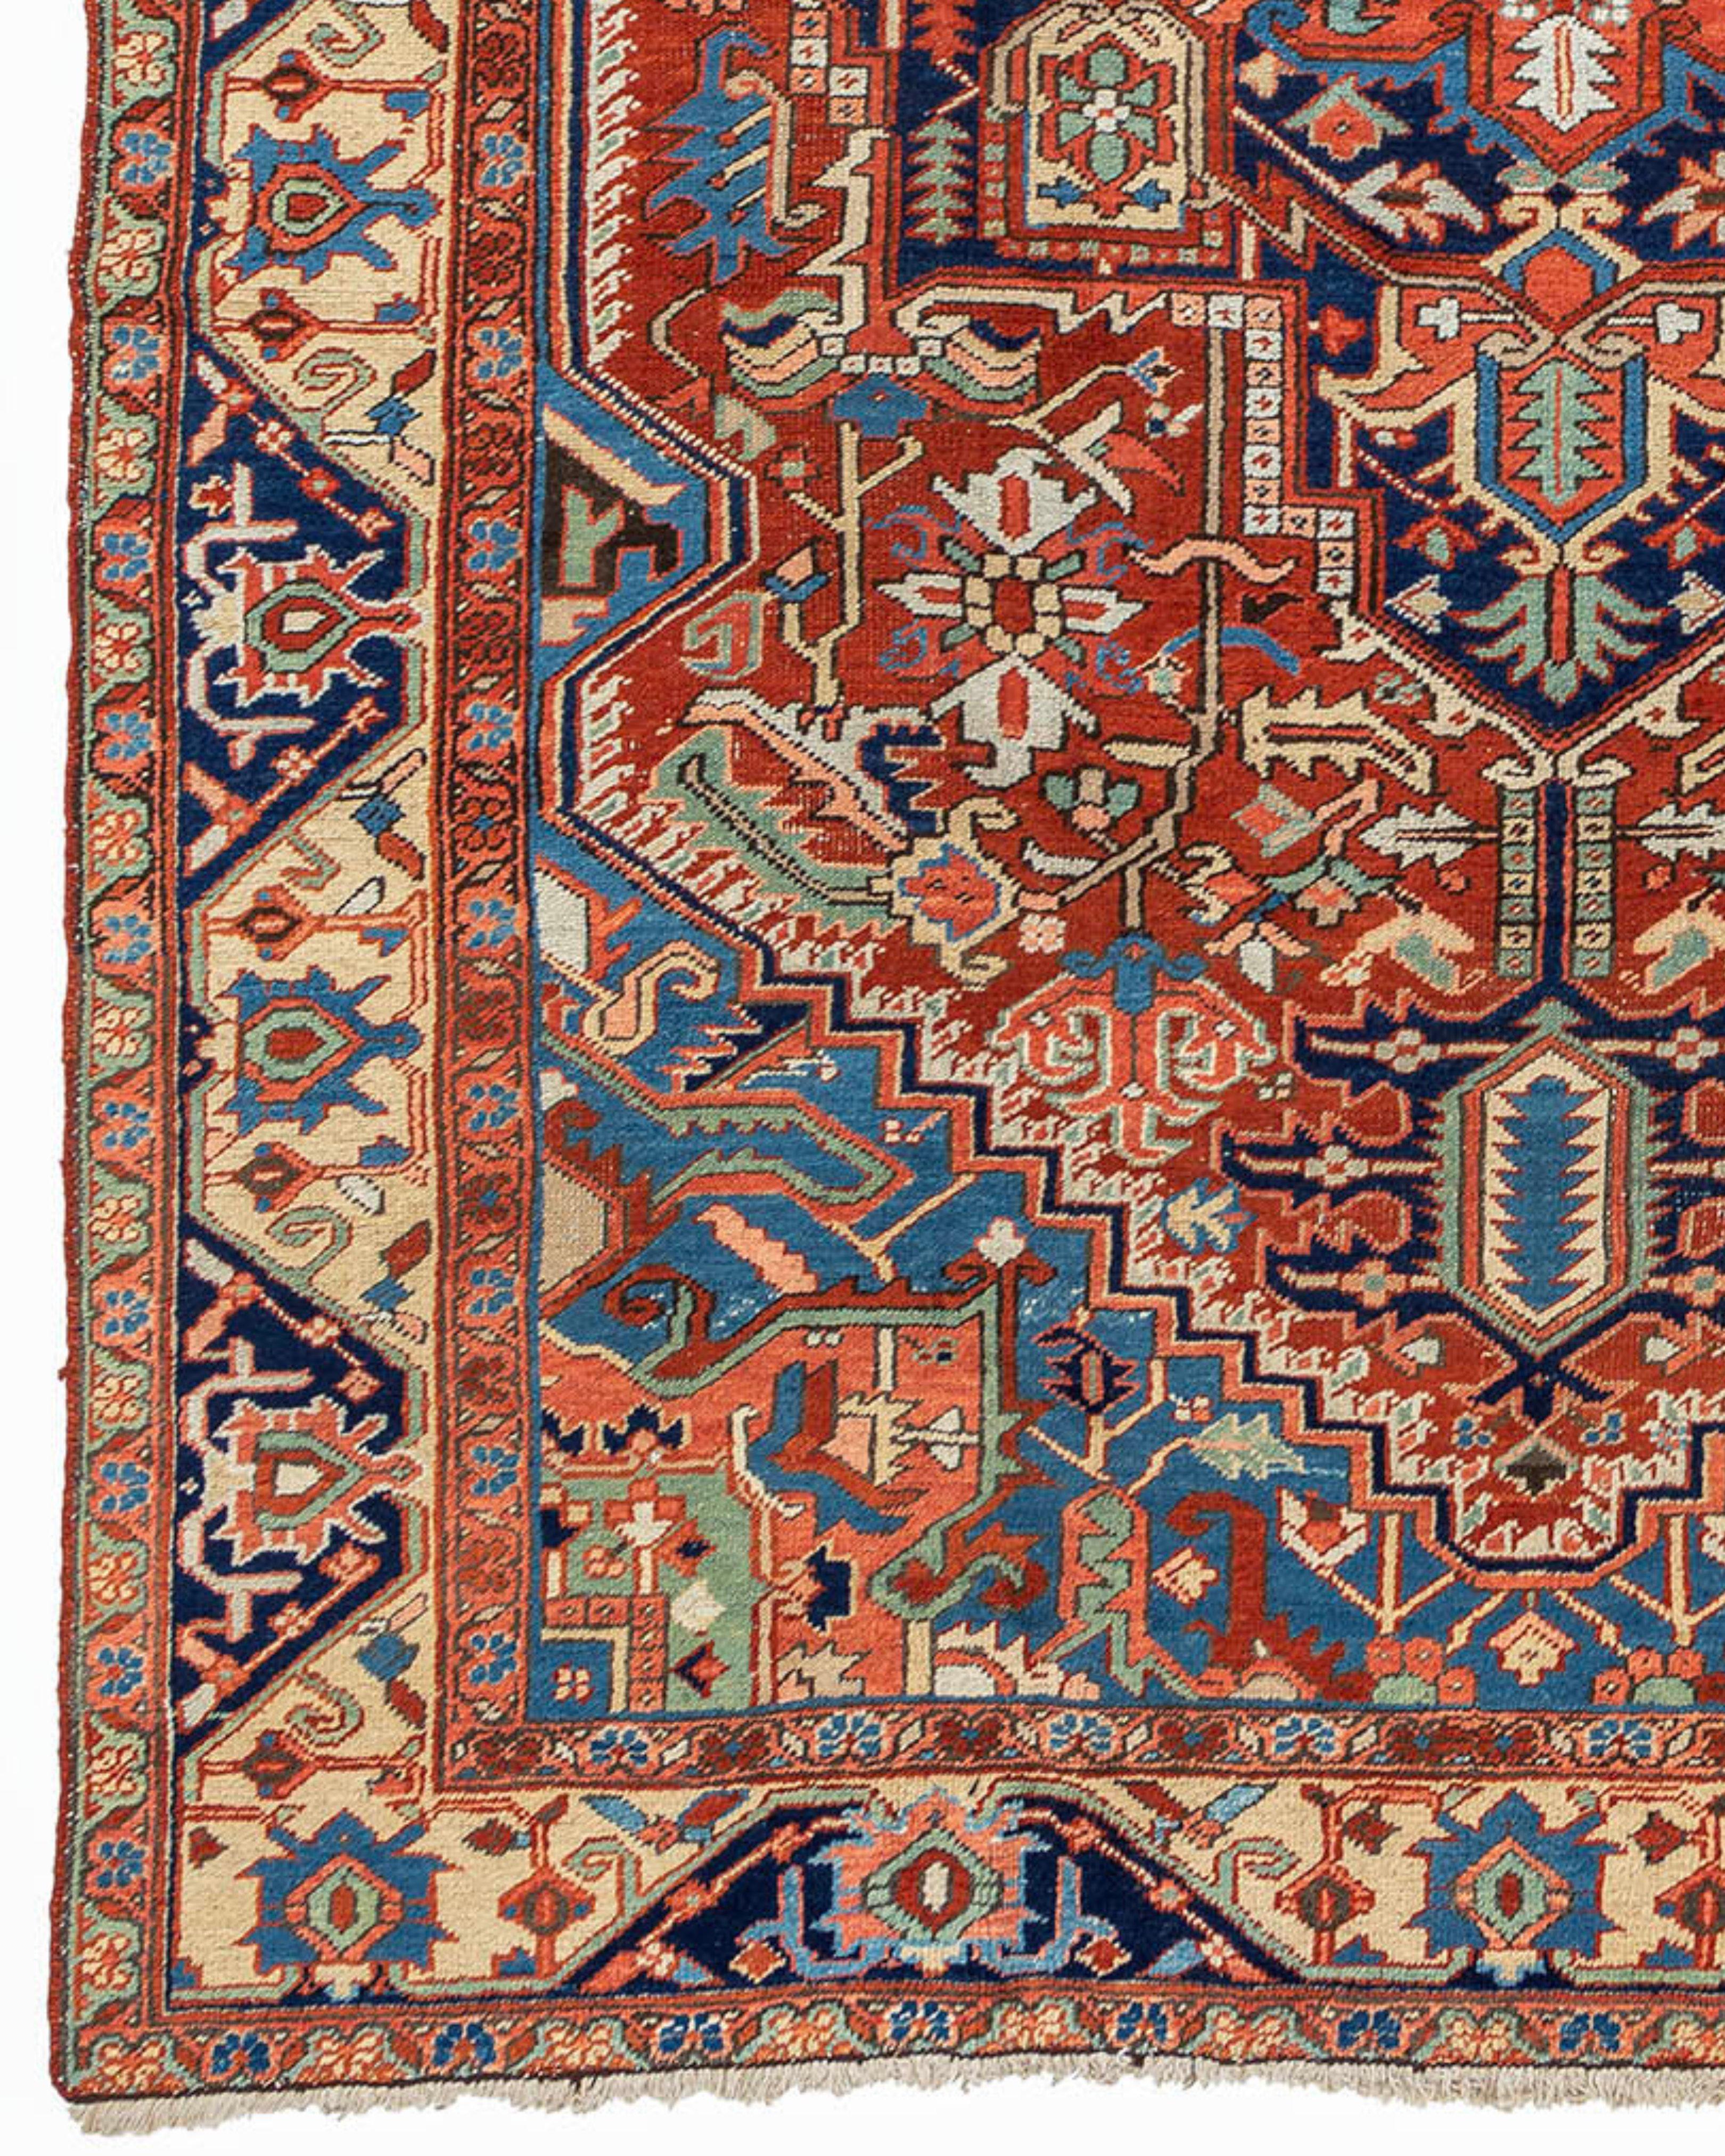 Hand-Knotted Heriz Rug, Early 20th century